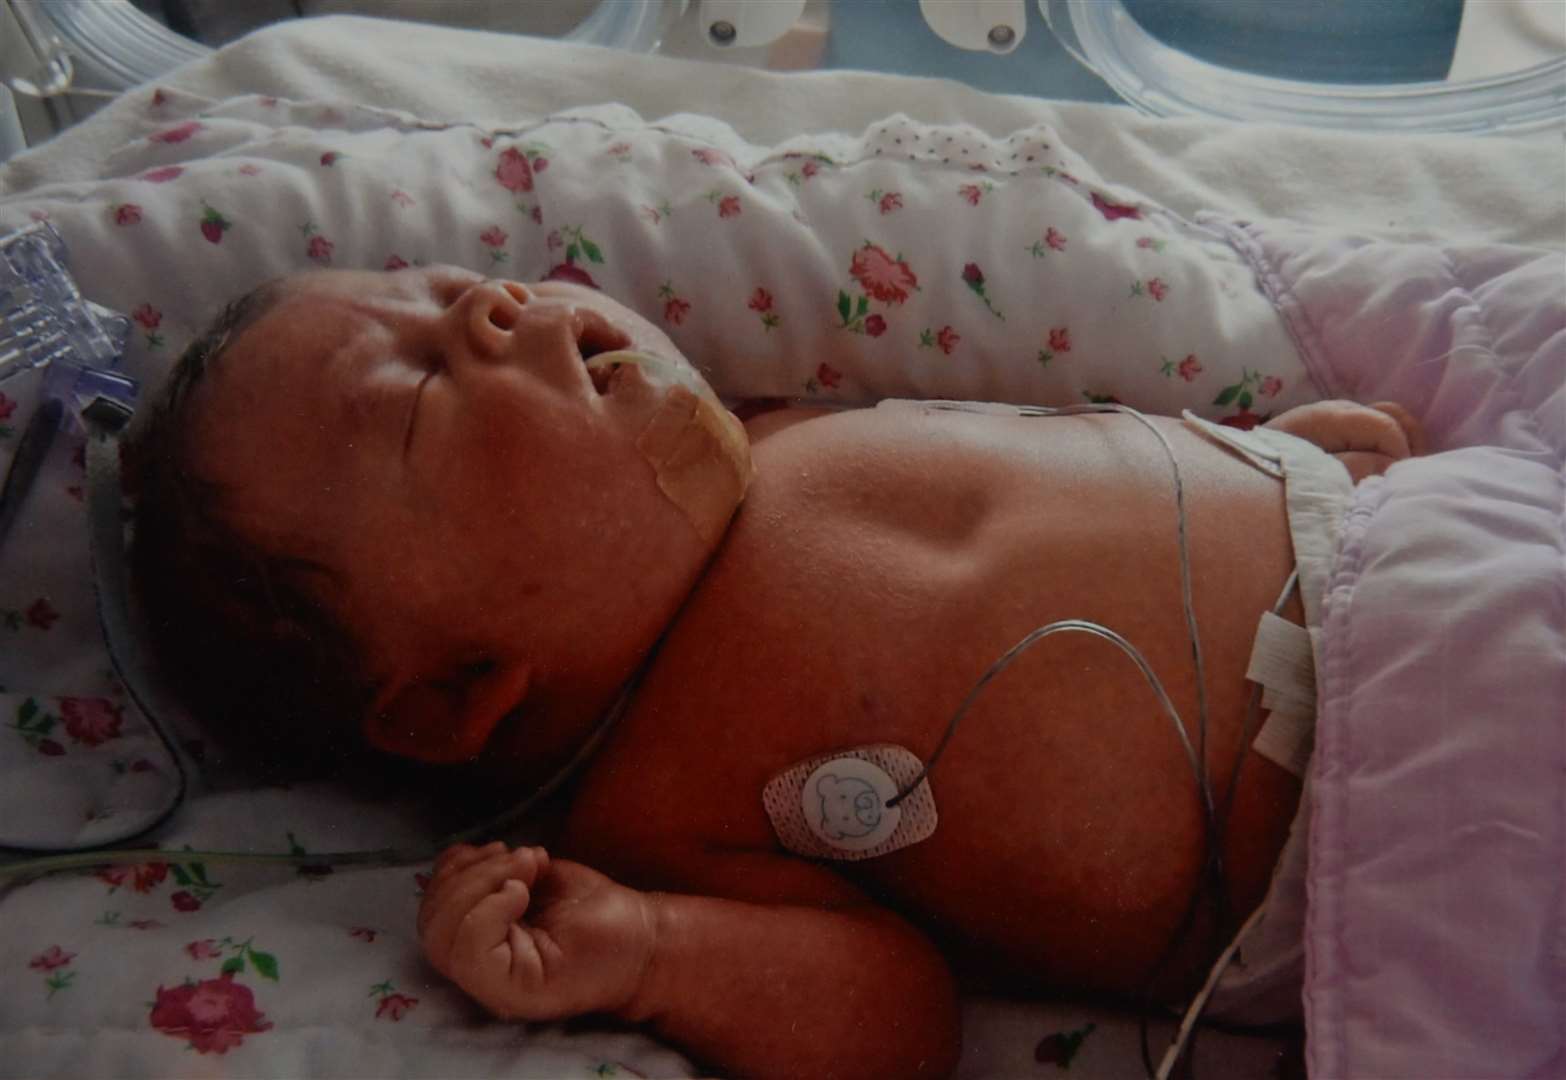 Katie had open-heart surgery when she was about eight weeks old